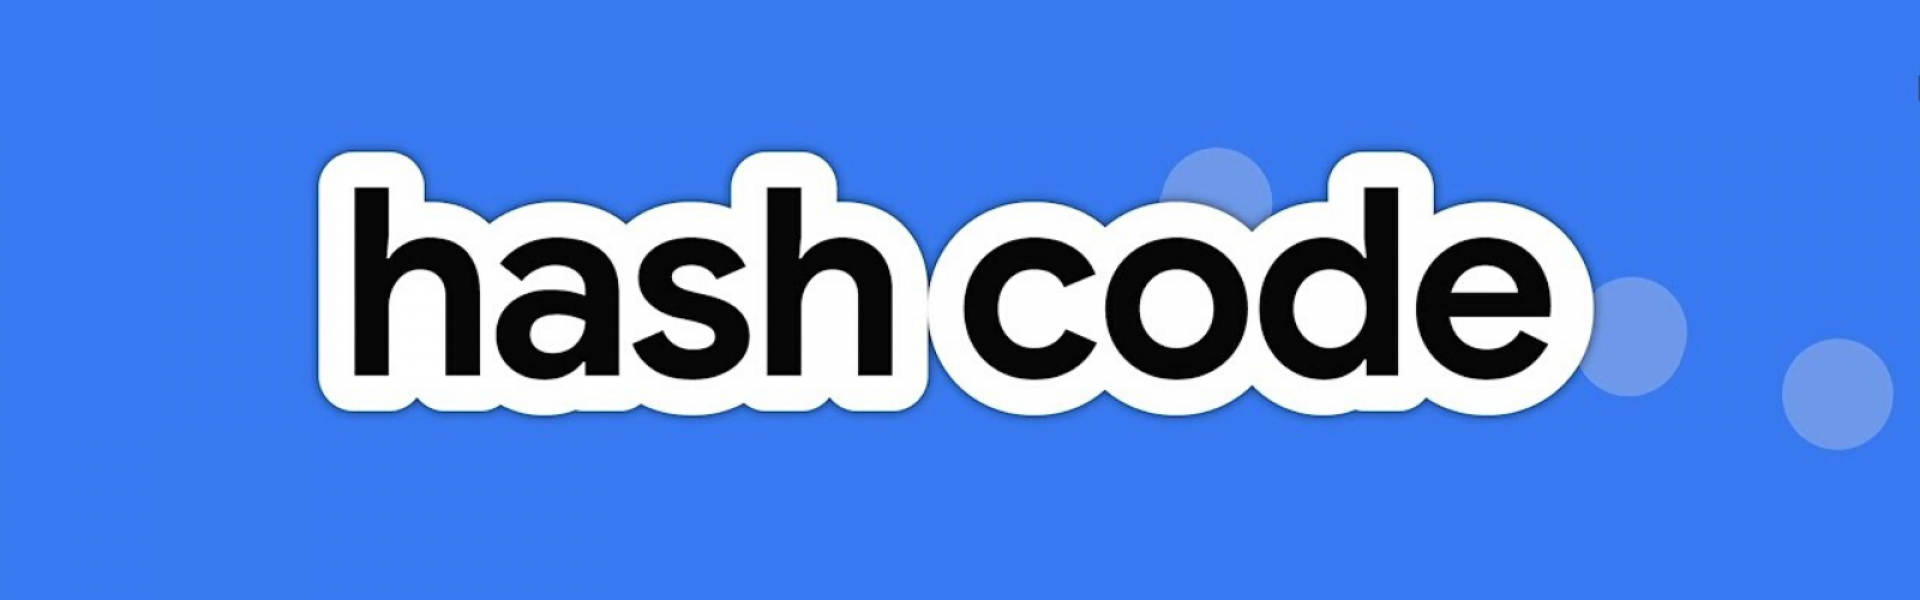 Hash code 2020 by VISEO